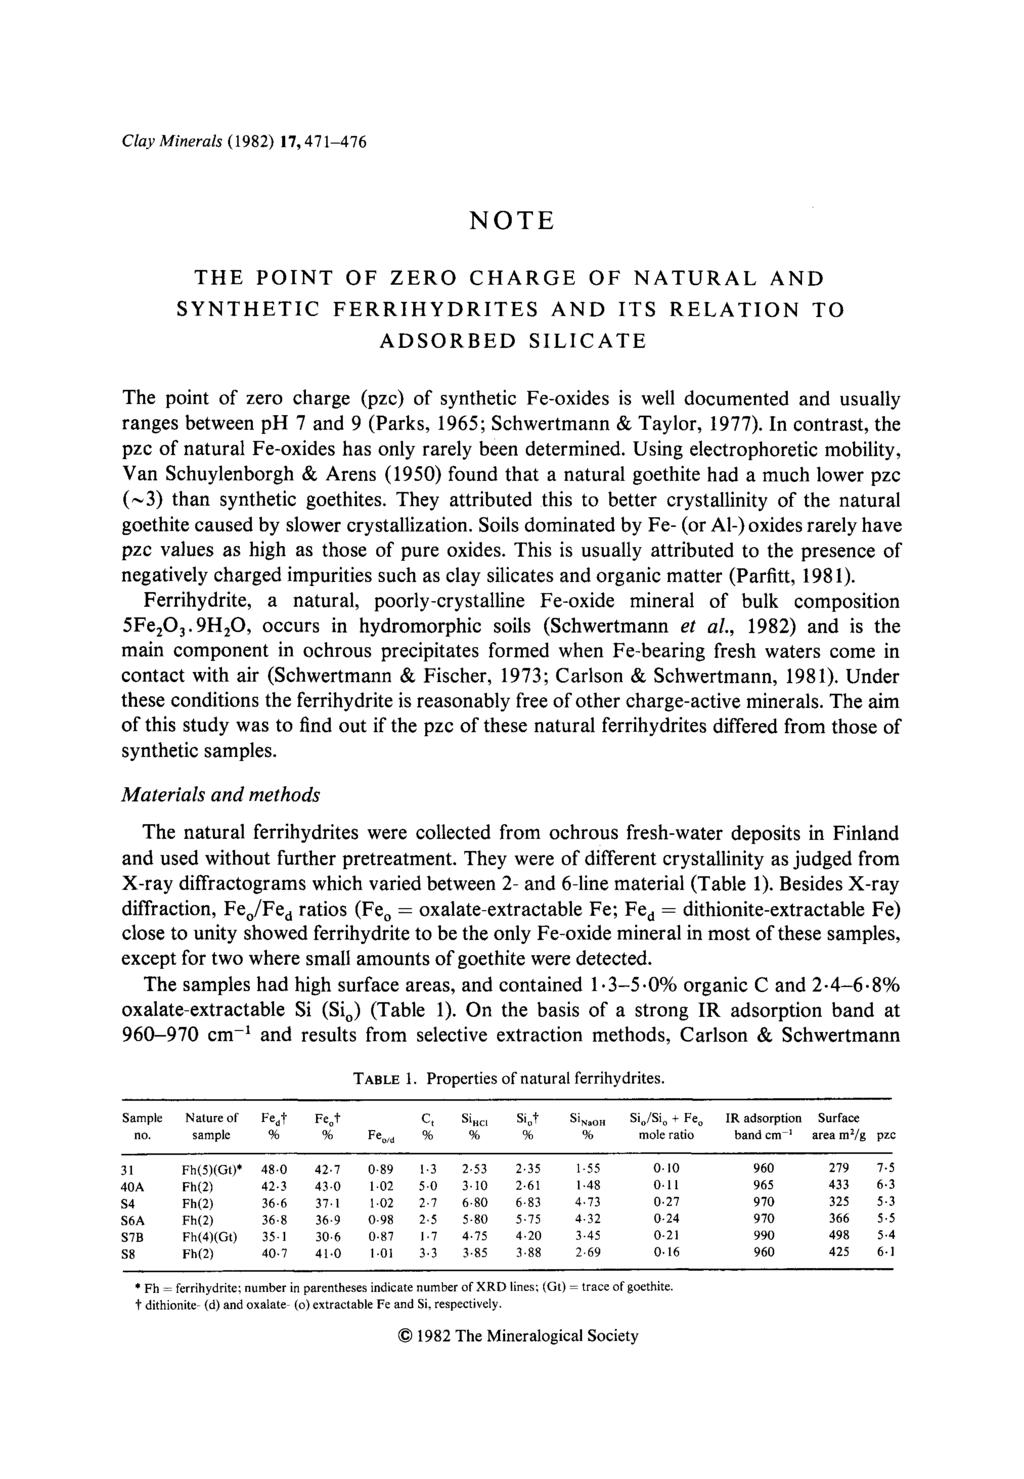 Clay Minerals (1982) 17, 471-476 NOTE THE POINT OF ZERO CHARGE OF NATURAL AND SYNTHETIC FERRIHYDRITES AND ITS RELATION TO ADSORBED SILICATE The point of zero charge (pzc) of synthetic Fe-oxides is